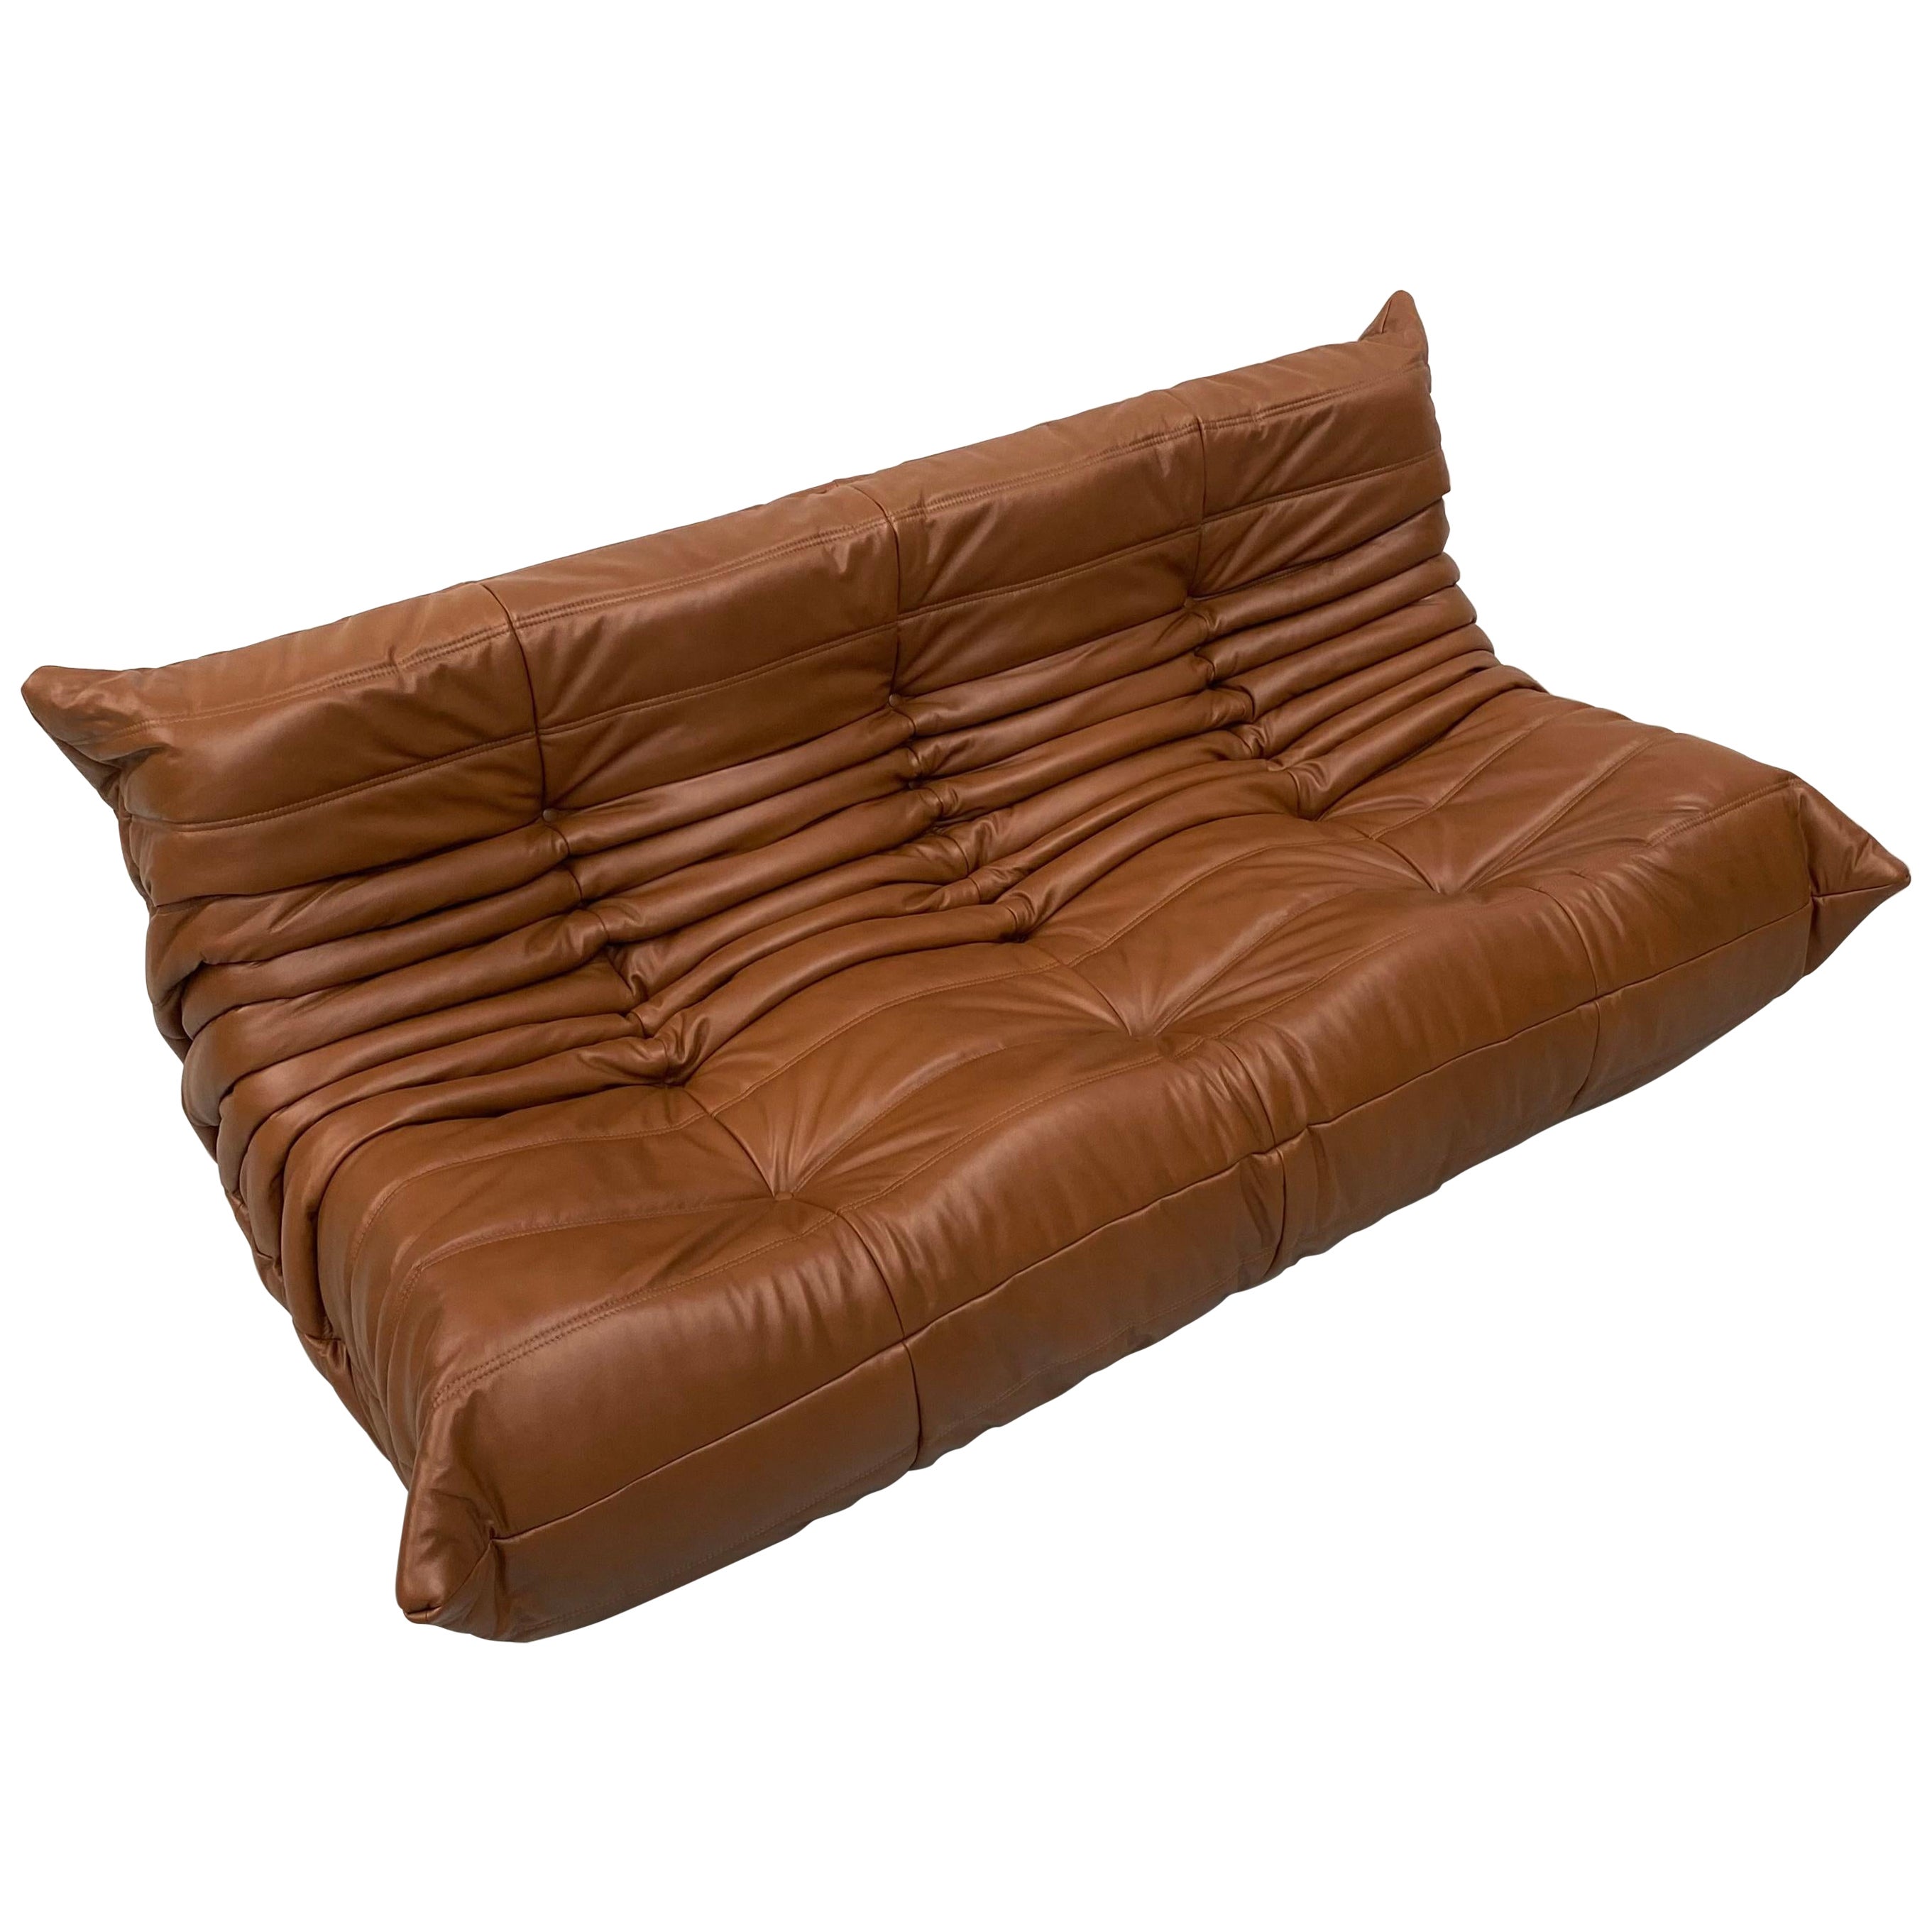 French Togo Sofa in Dark Cognac Leather by M. Ducaroy for Ligne Roset, 1970s